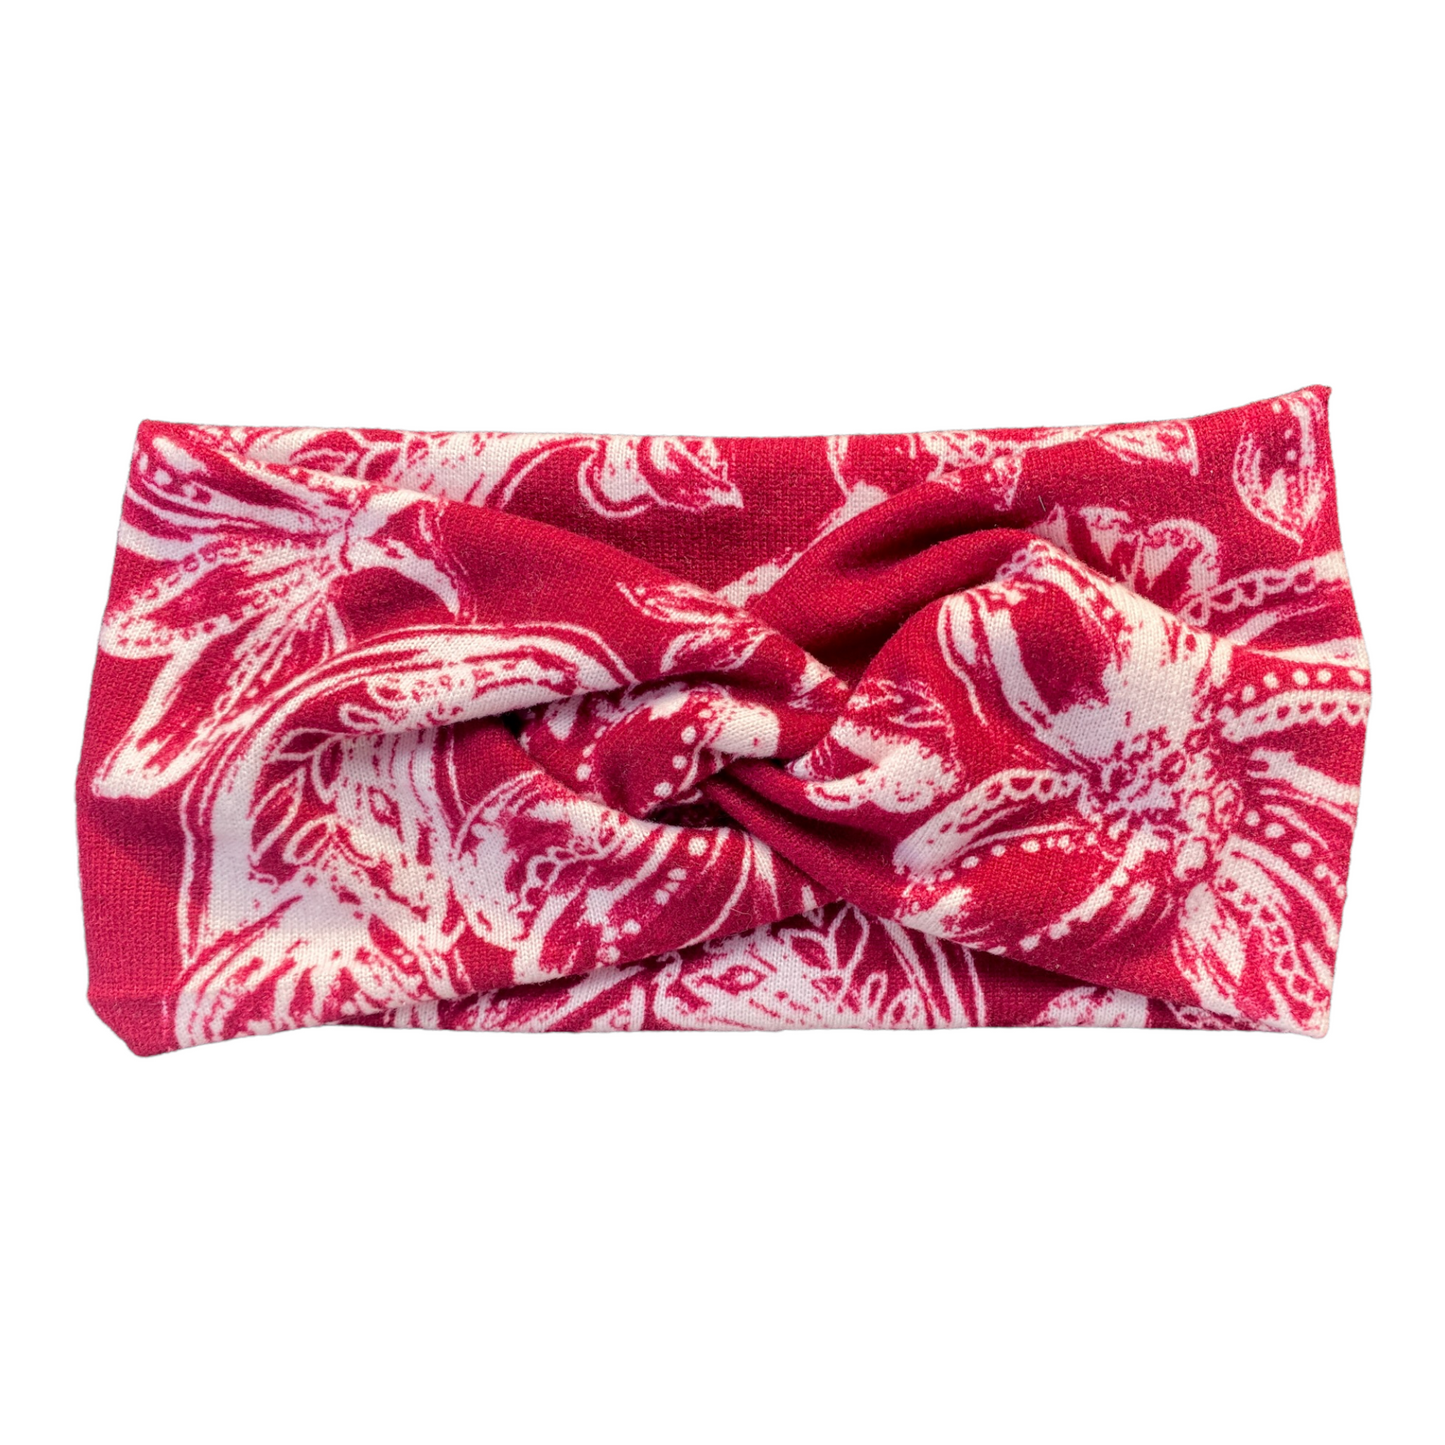 Headbands - Red Floral (Sweater Material)